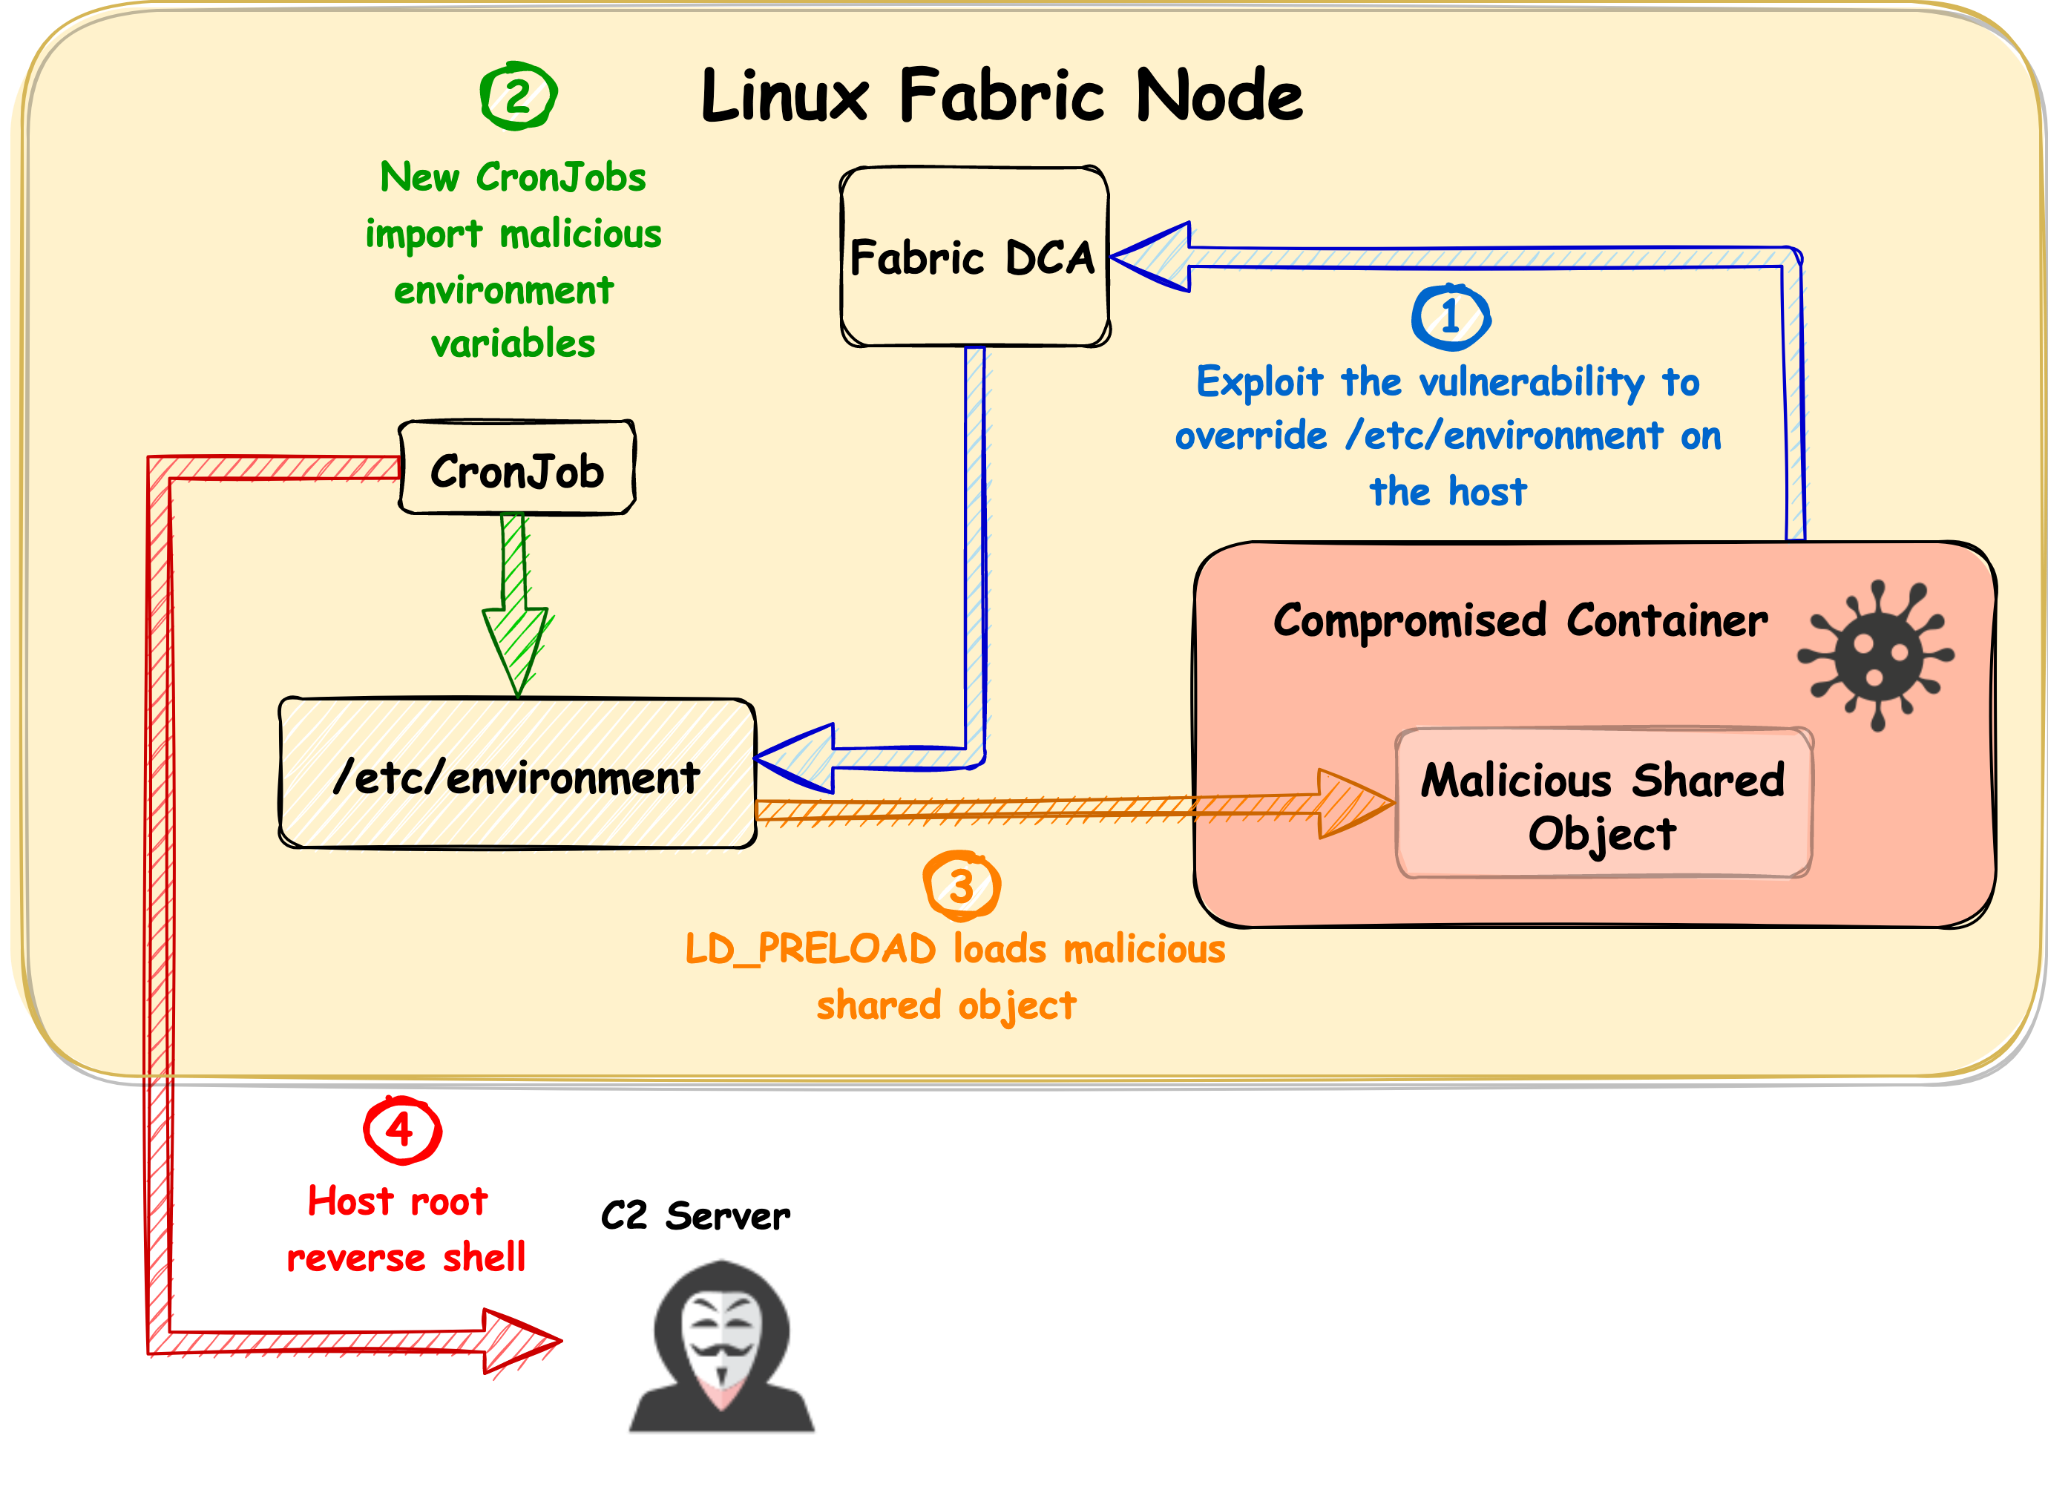 Linux Fabric Node. Exploitation flow is illustrated step by step. 1) Exploit the vulnerability to overwrite /etc/environment on the host, 2) New CronJobs import malicious environment variables, 3) LD_PRELOAD loads malicious shared object, 4) Host root reverse shell